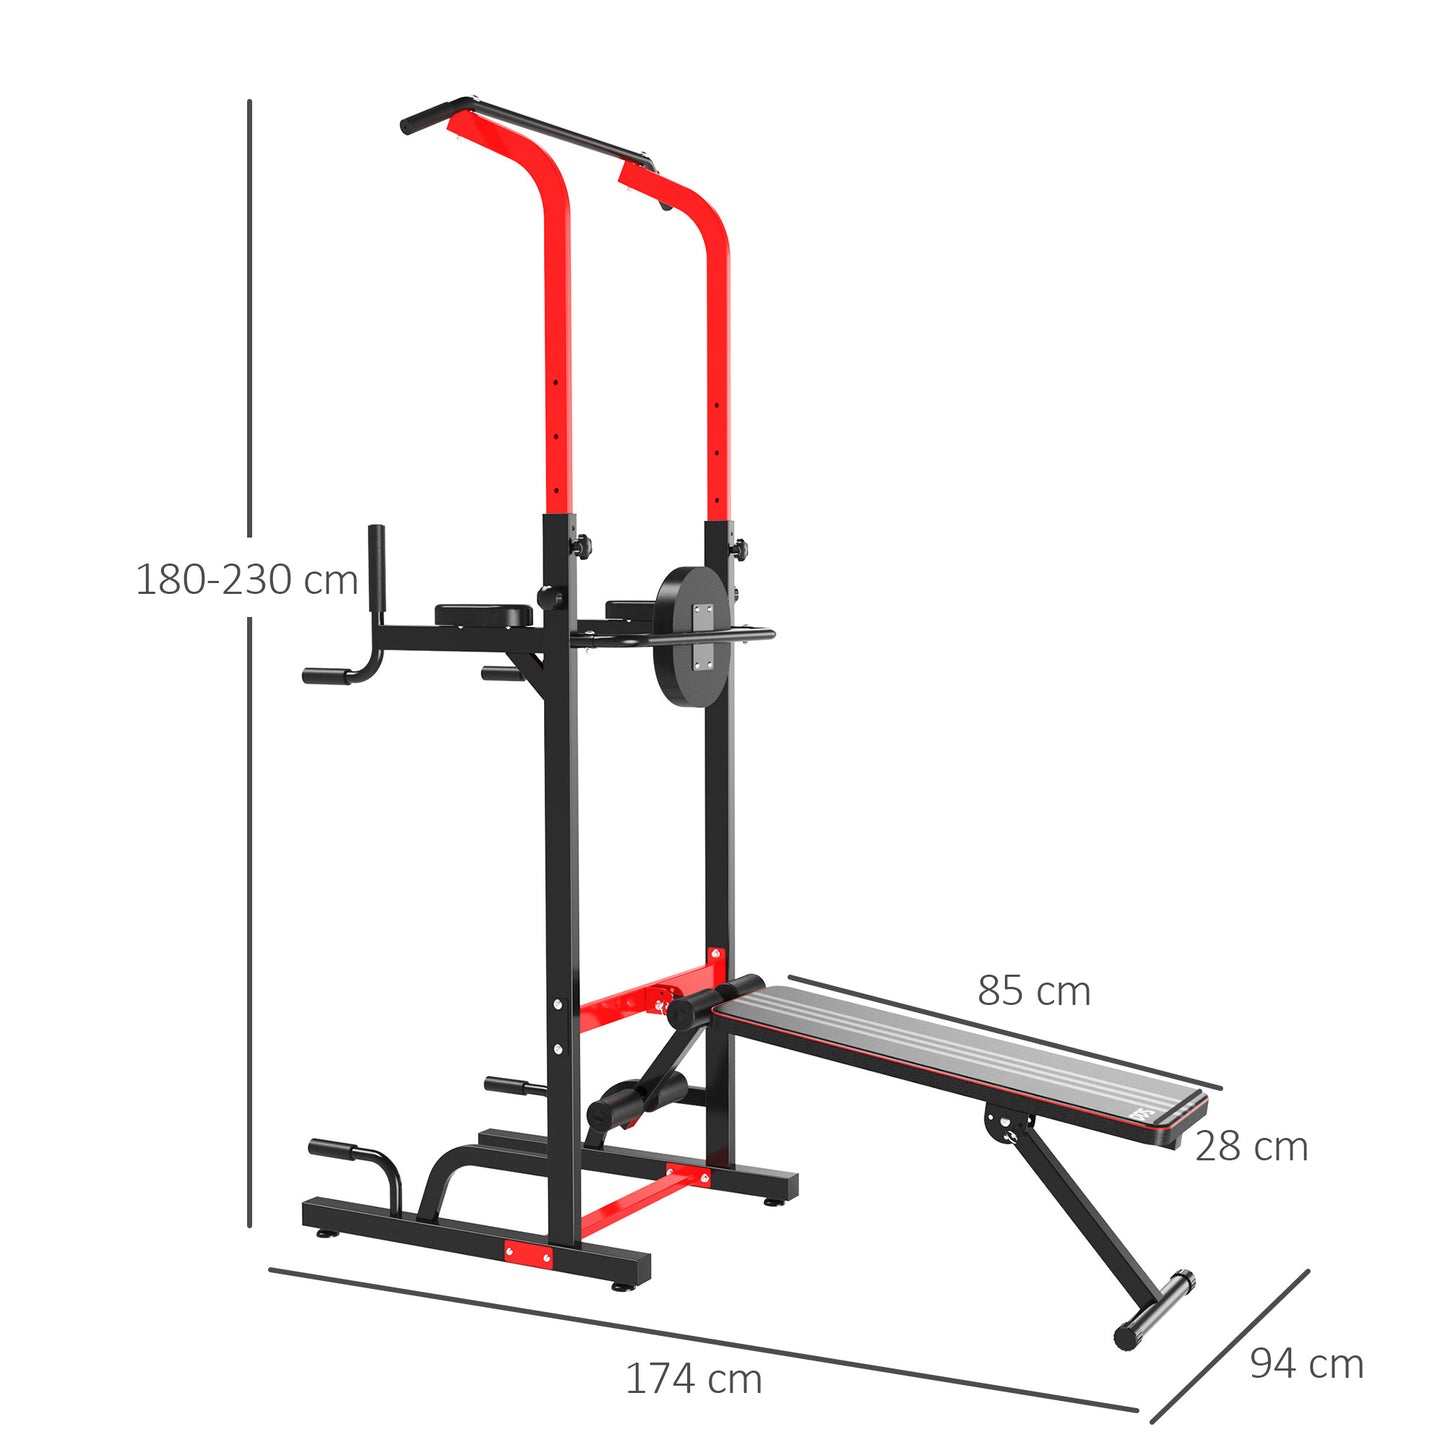 HOMCOM Power Tower Station Pull Up Bar for Home Gym Workout Equipment With Sit Up Bench